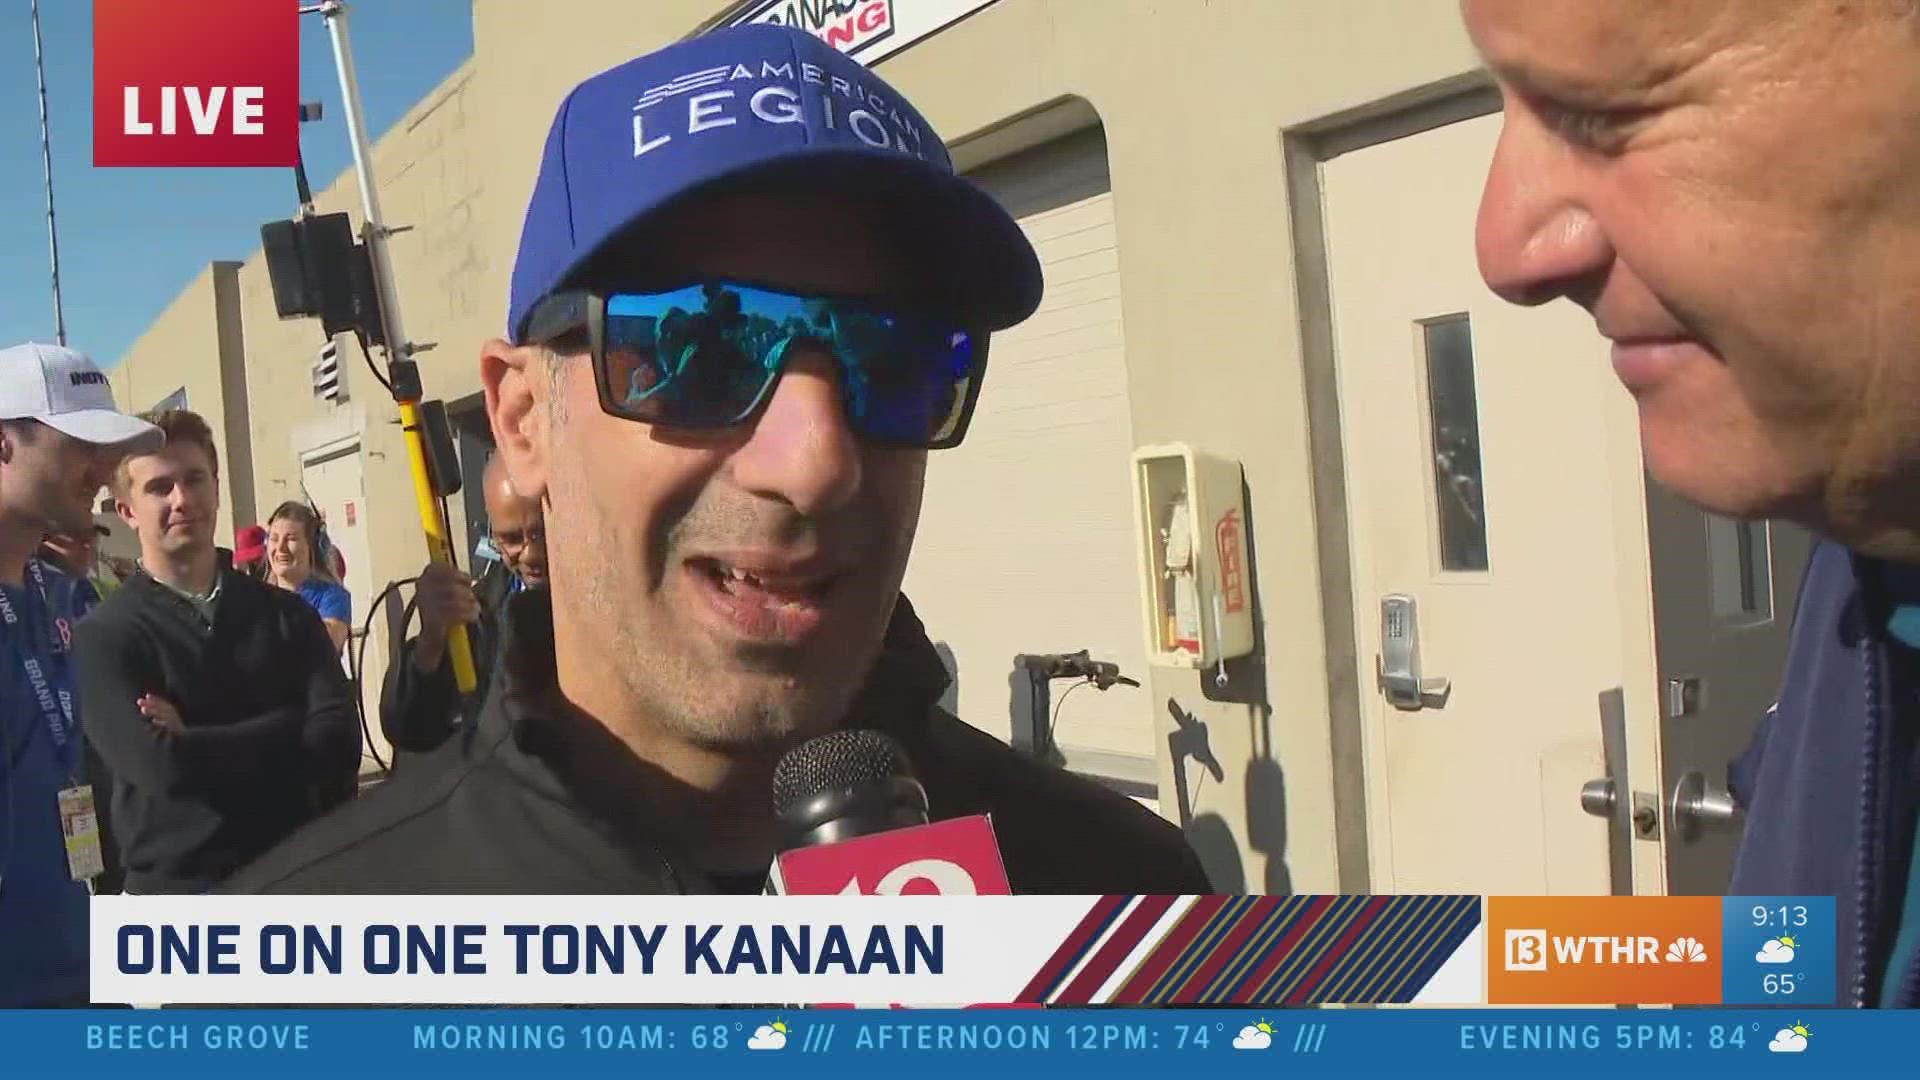 Tony Kanaan visited with Dave Calabro in the garages before his 21st Indy 500 start.